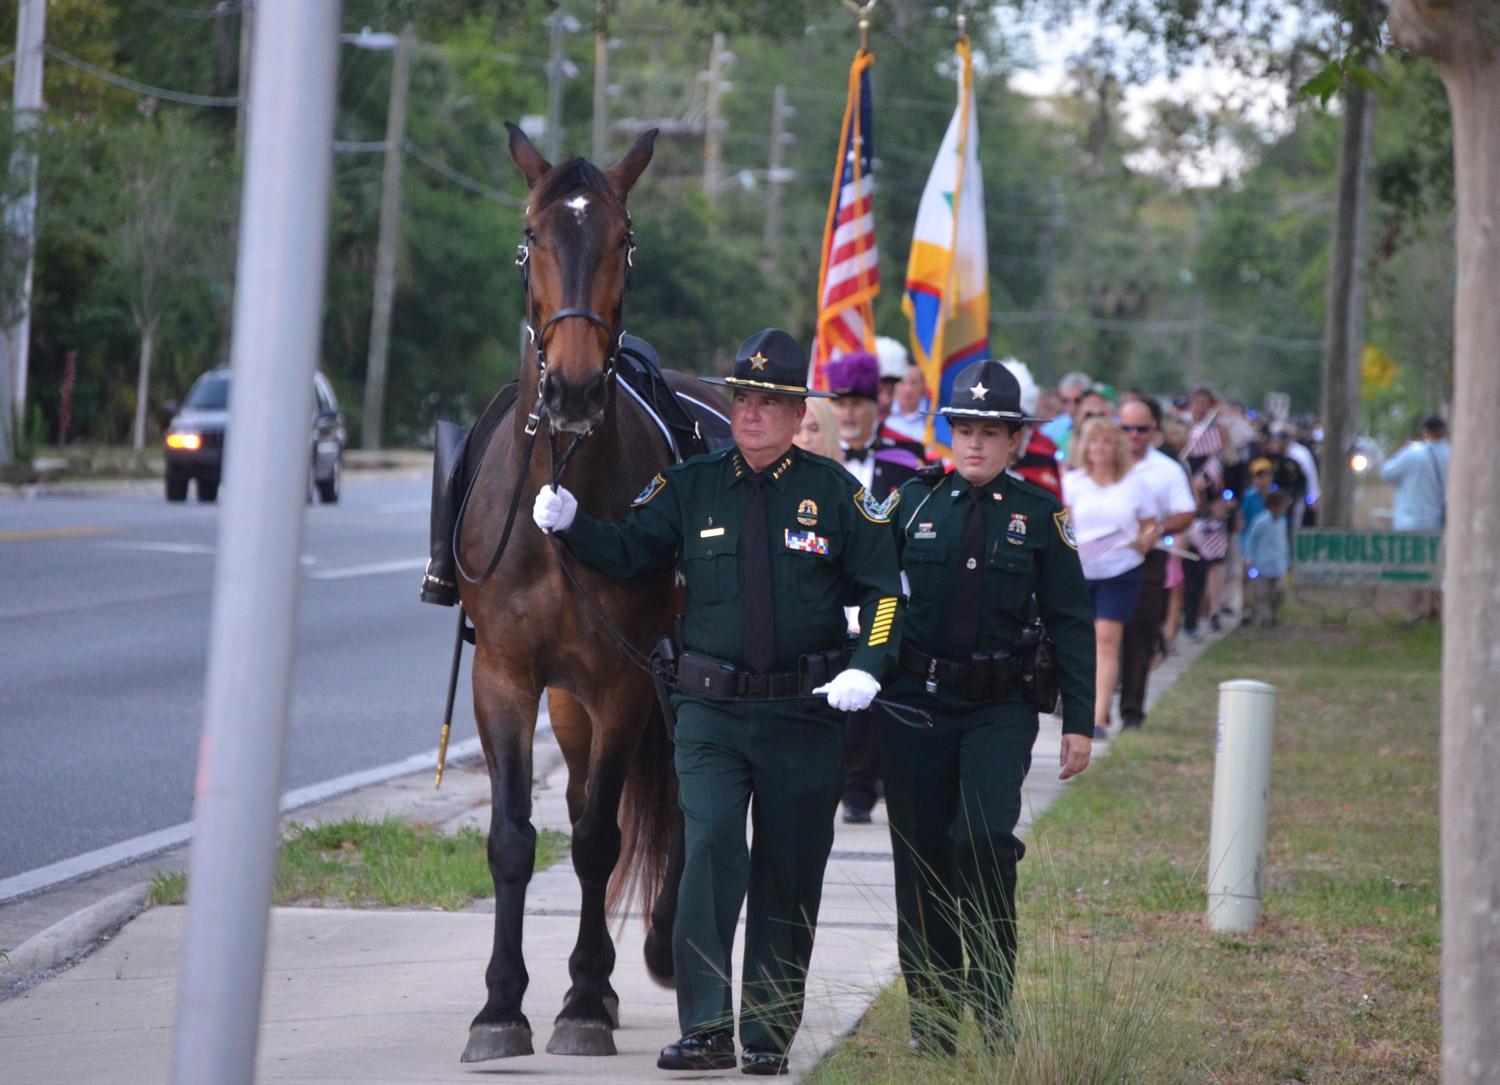 Sheriff Rick Staly, with a riderless horse symbolizing the loss of fallen officers, leads a procession from the county courthouse to the Sheriff's Operations Center ahead of a ceremony Thursday evening. Click on the image for larger view. (© FlaglerLive)